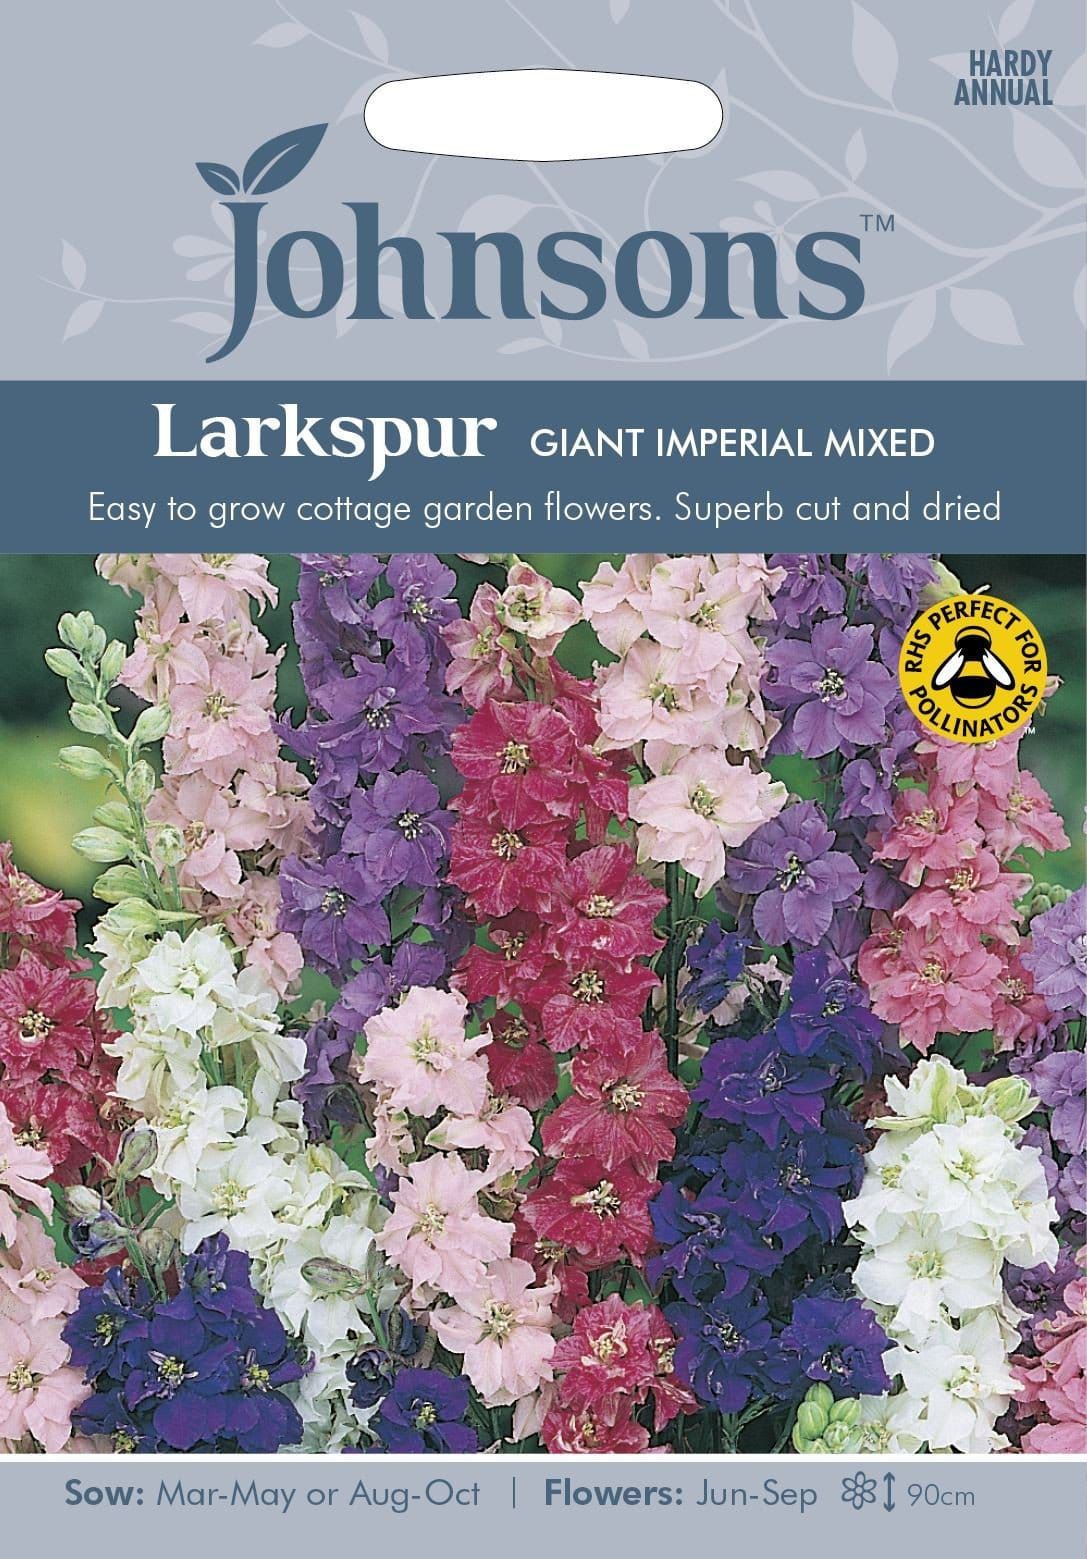 Johnsons Larkspur Giant Imperial Mixed 300 Seeds